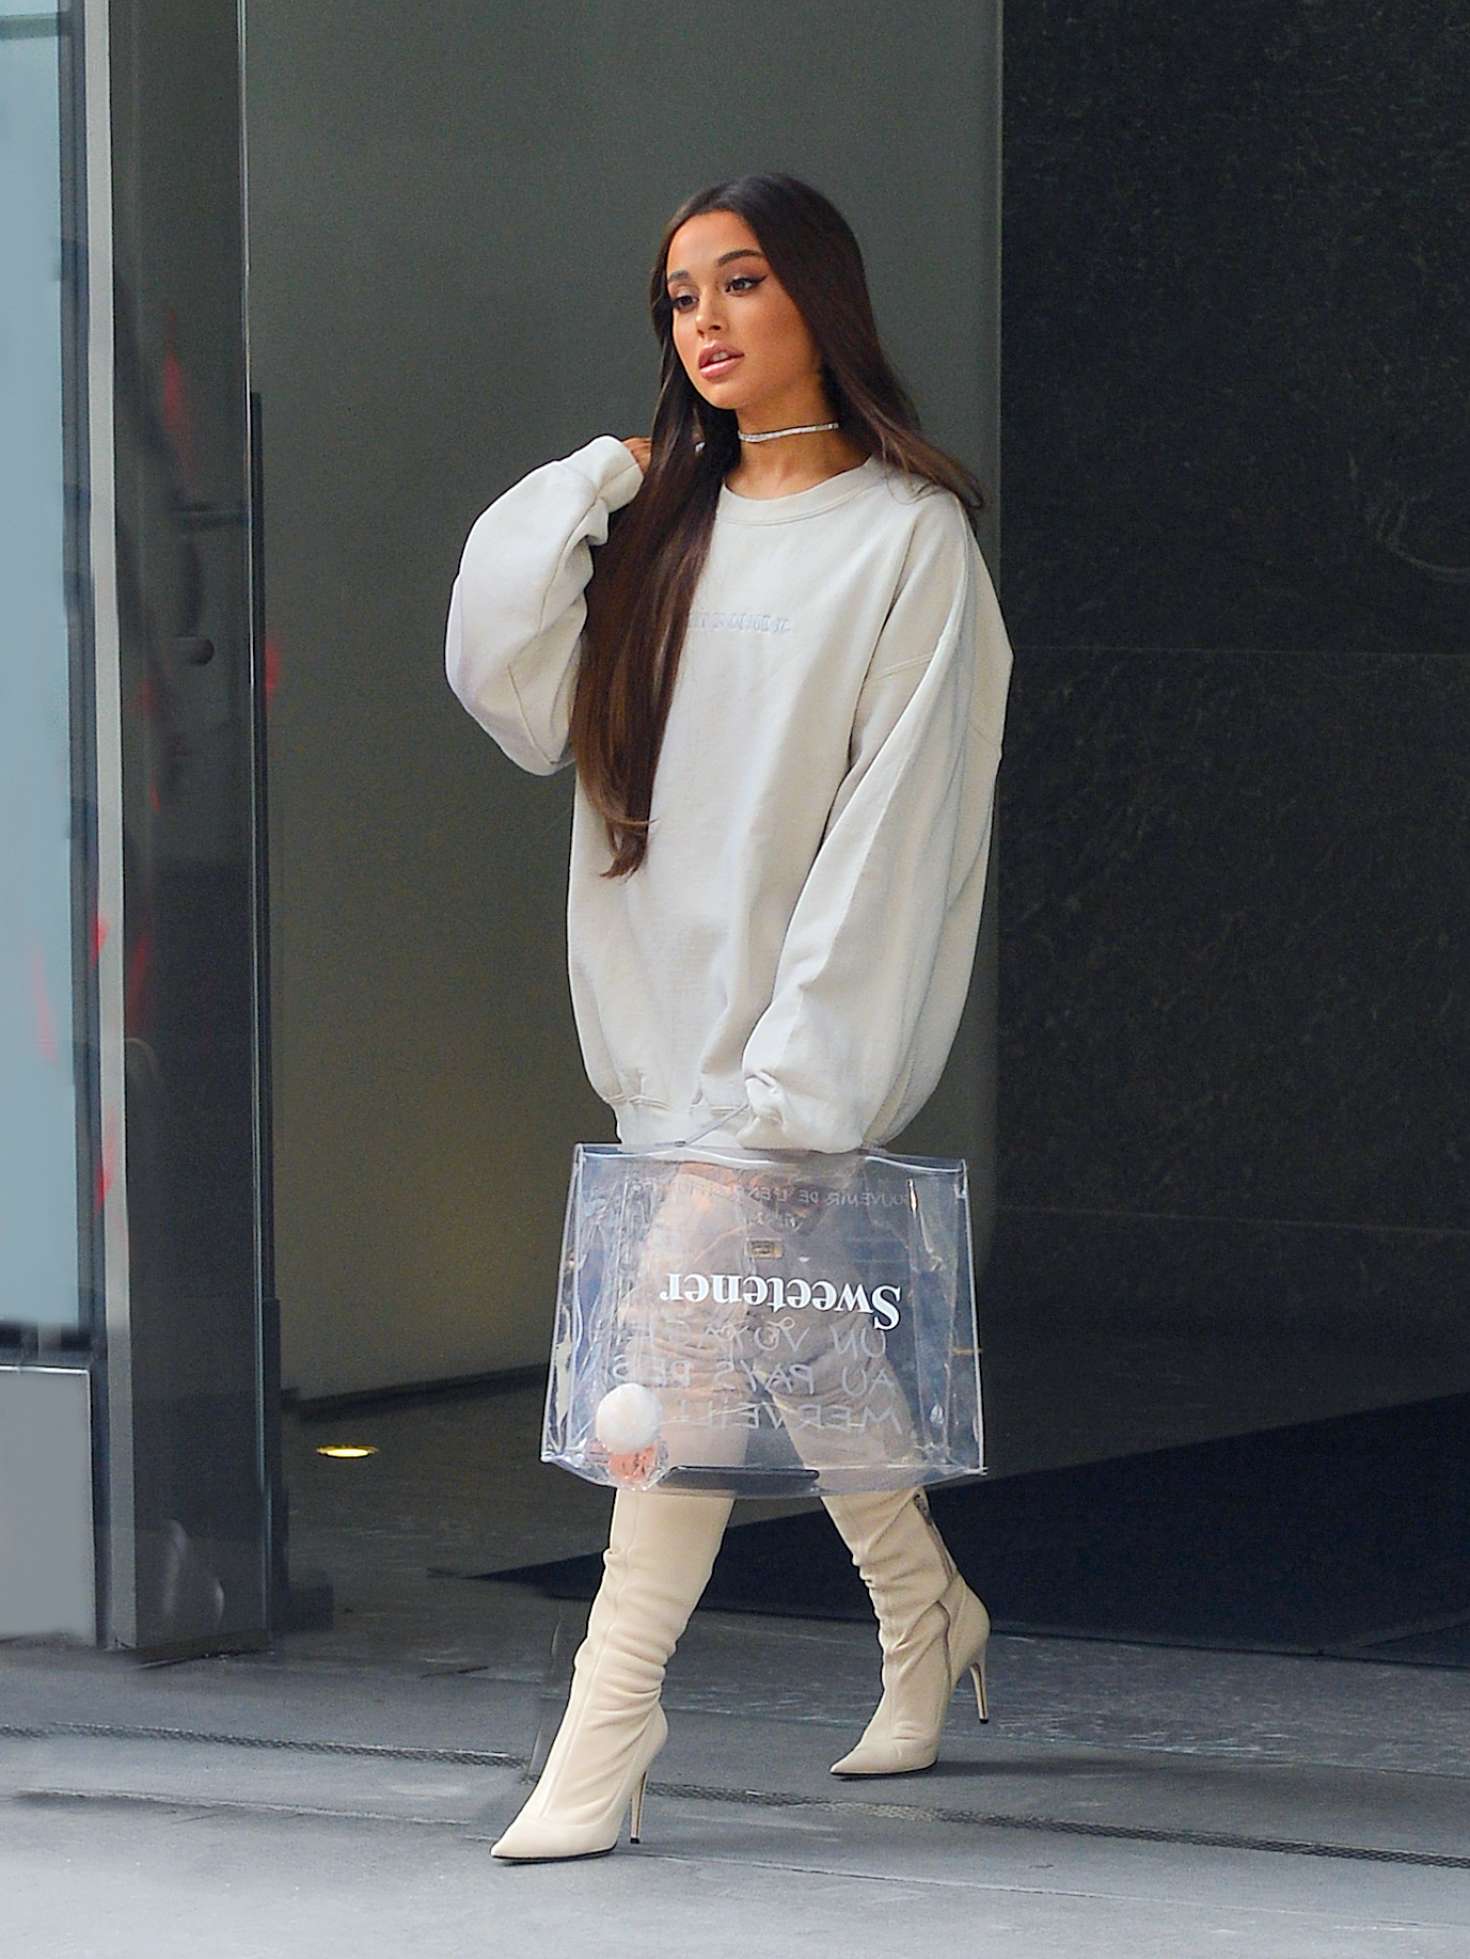 Ariana Grande â€“ Heads to promote her new album Sweetener in NYC